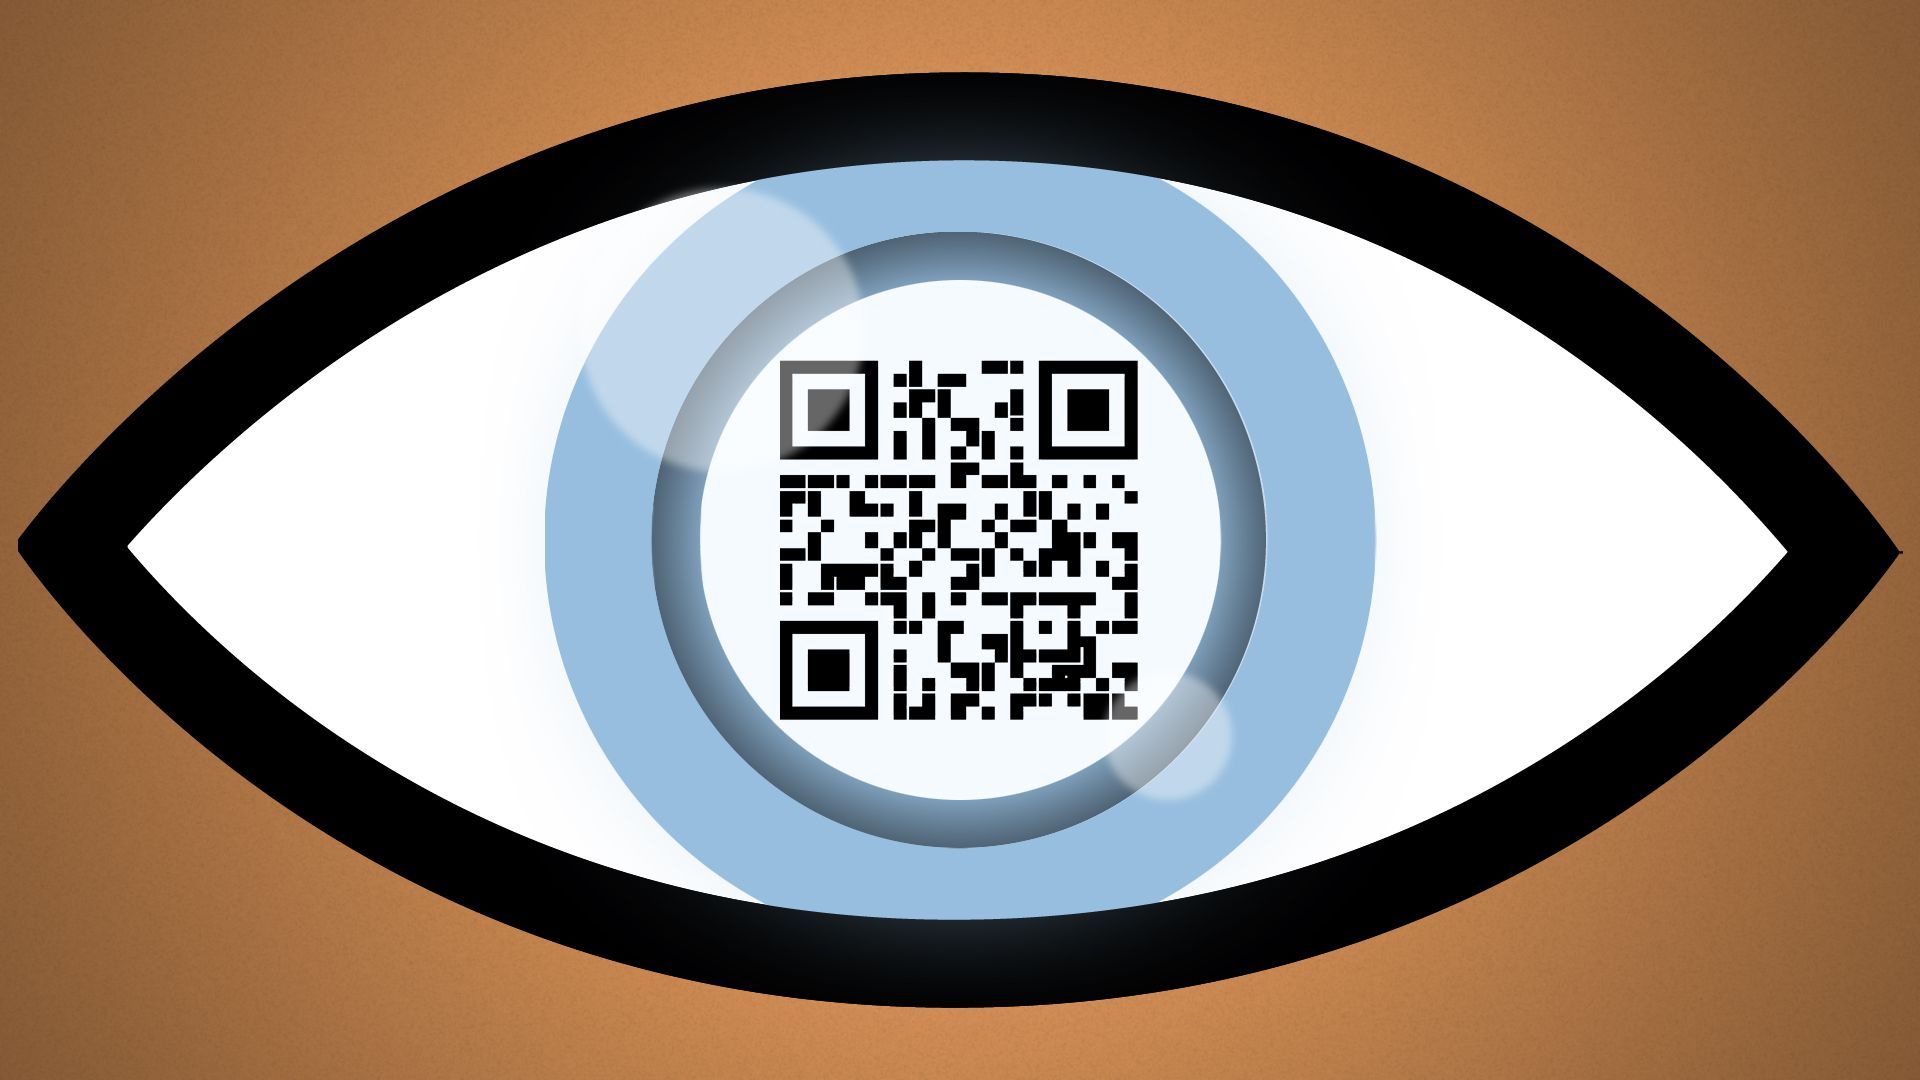 Close-up of eyeball illustration with QR code in pupil.